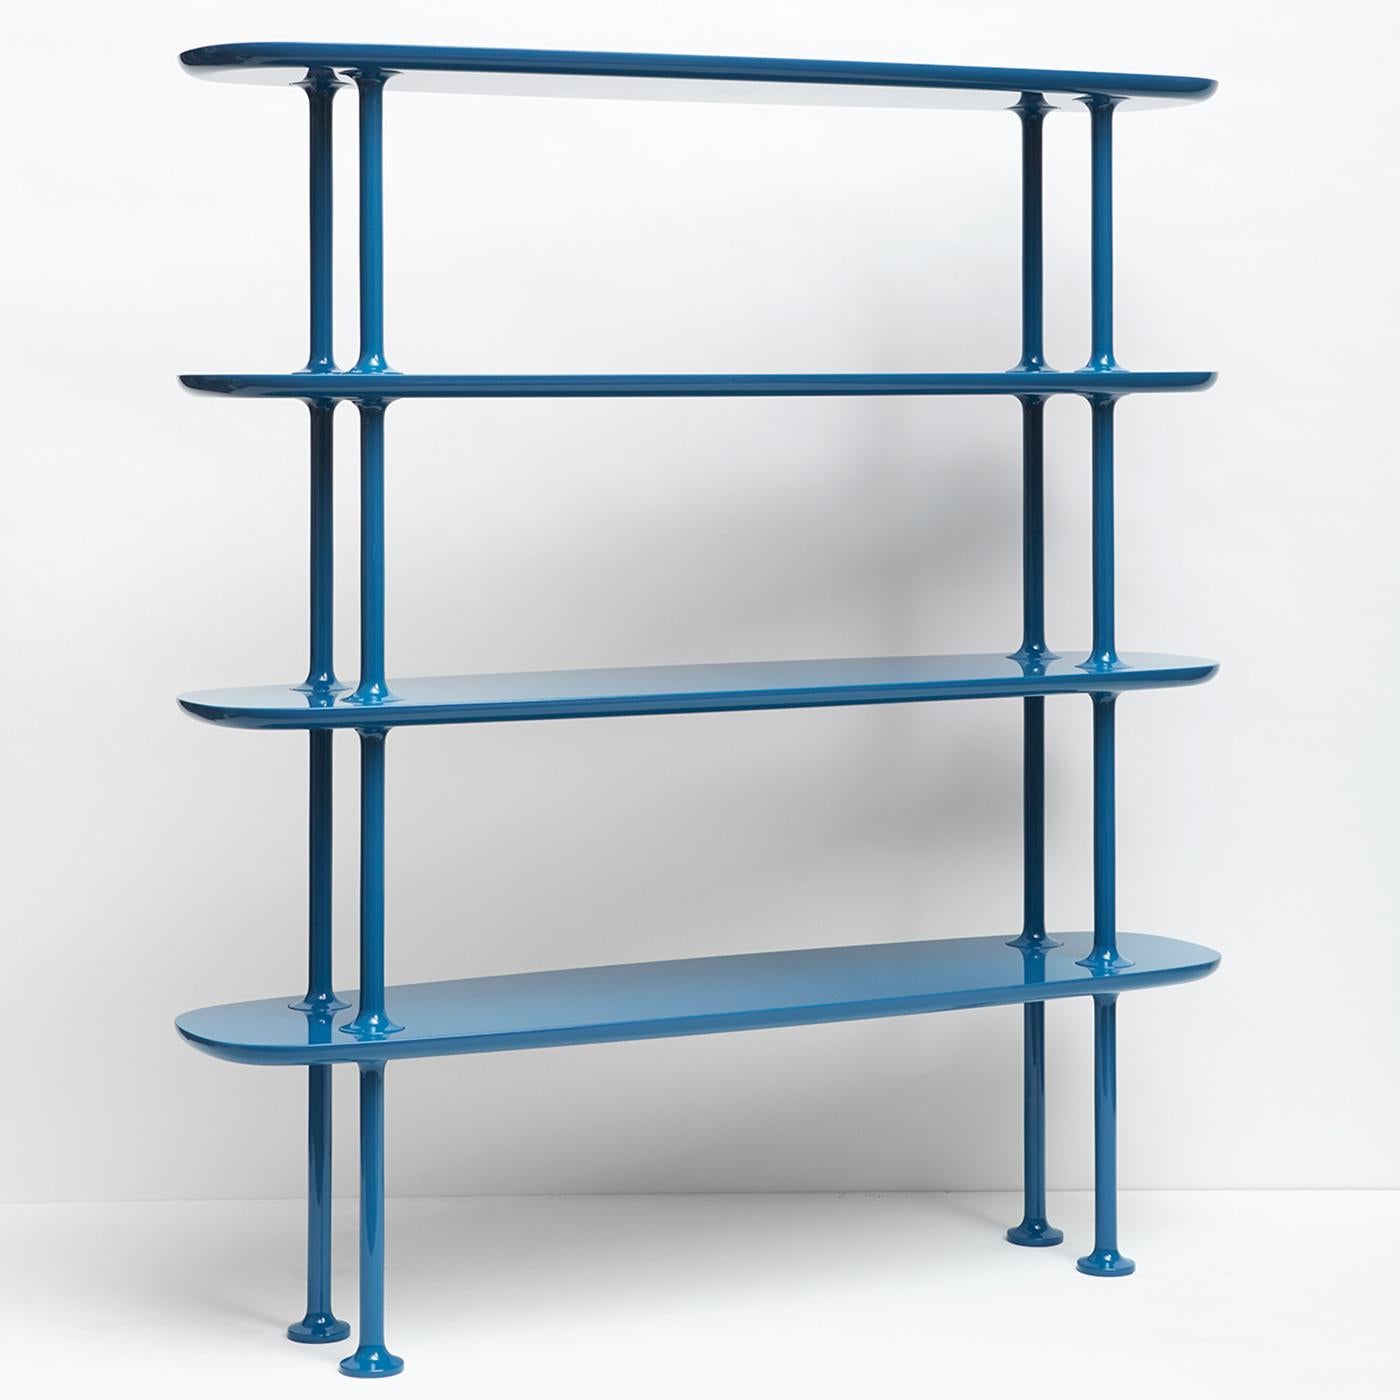 Defined by soft lines and visual lightness, the Bones Bookcase is carefully crafted of solid wood with a glossy cerulean lacquered finish that creates superb visual impact in a modern home or office decor. Four oblong shelves create a symmetrical